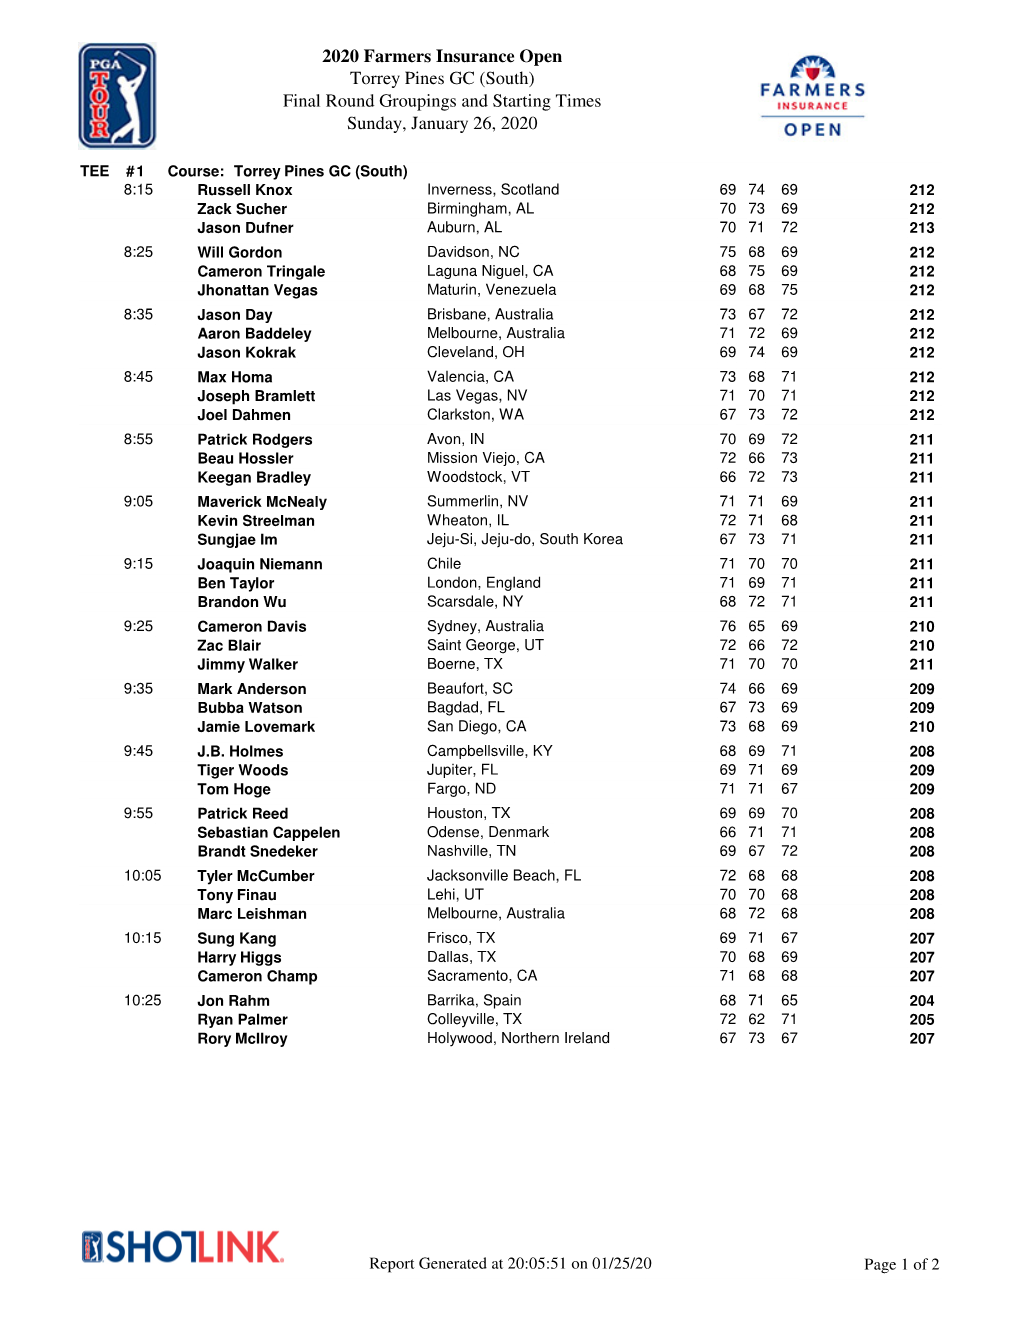 2020 Farmers Insurance Open Torrey Pines GC (South) Final Round Groupings and Starting Times Sunday, January 26, 2020